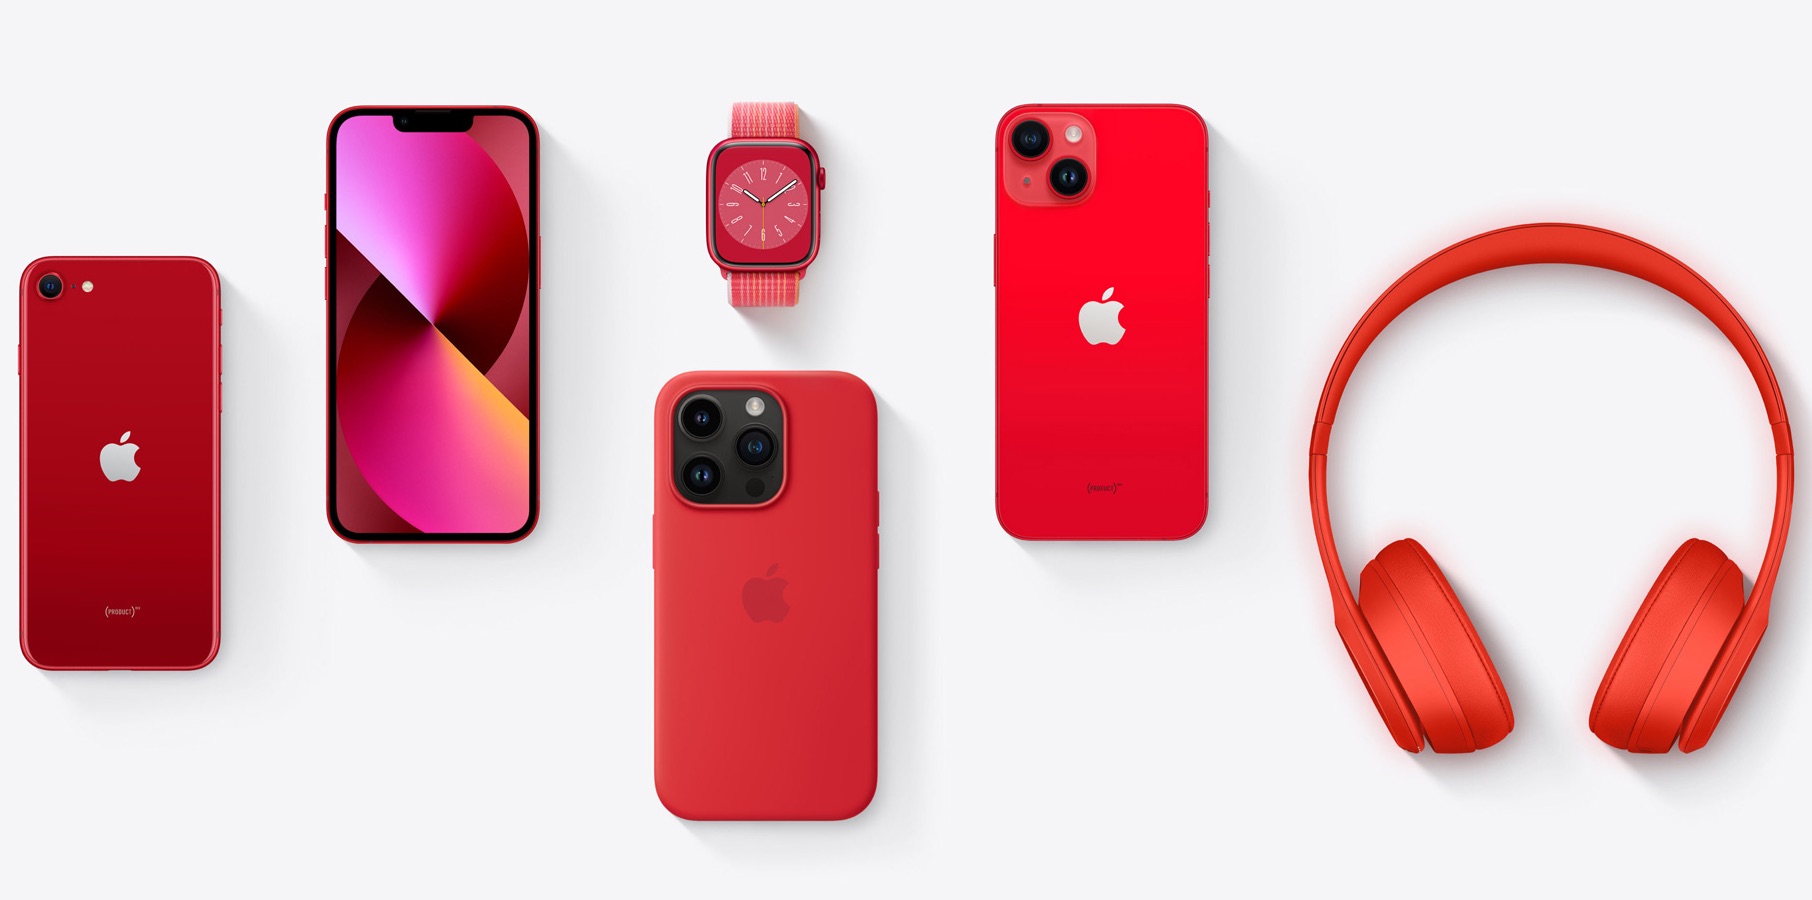 Apple raises visibility for World AIDS Day with (RED) products